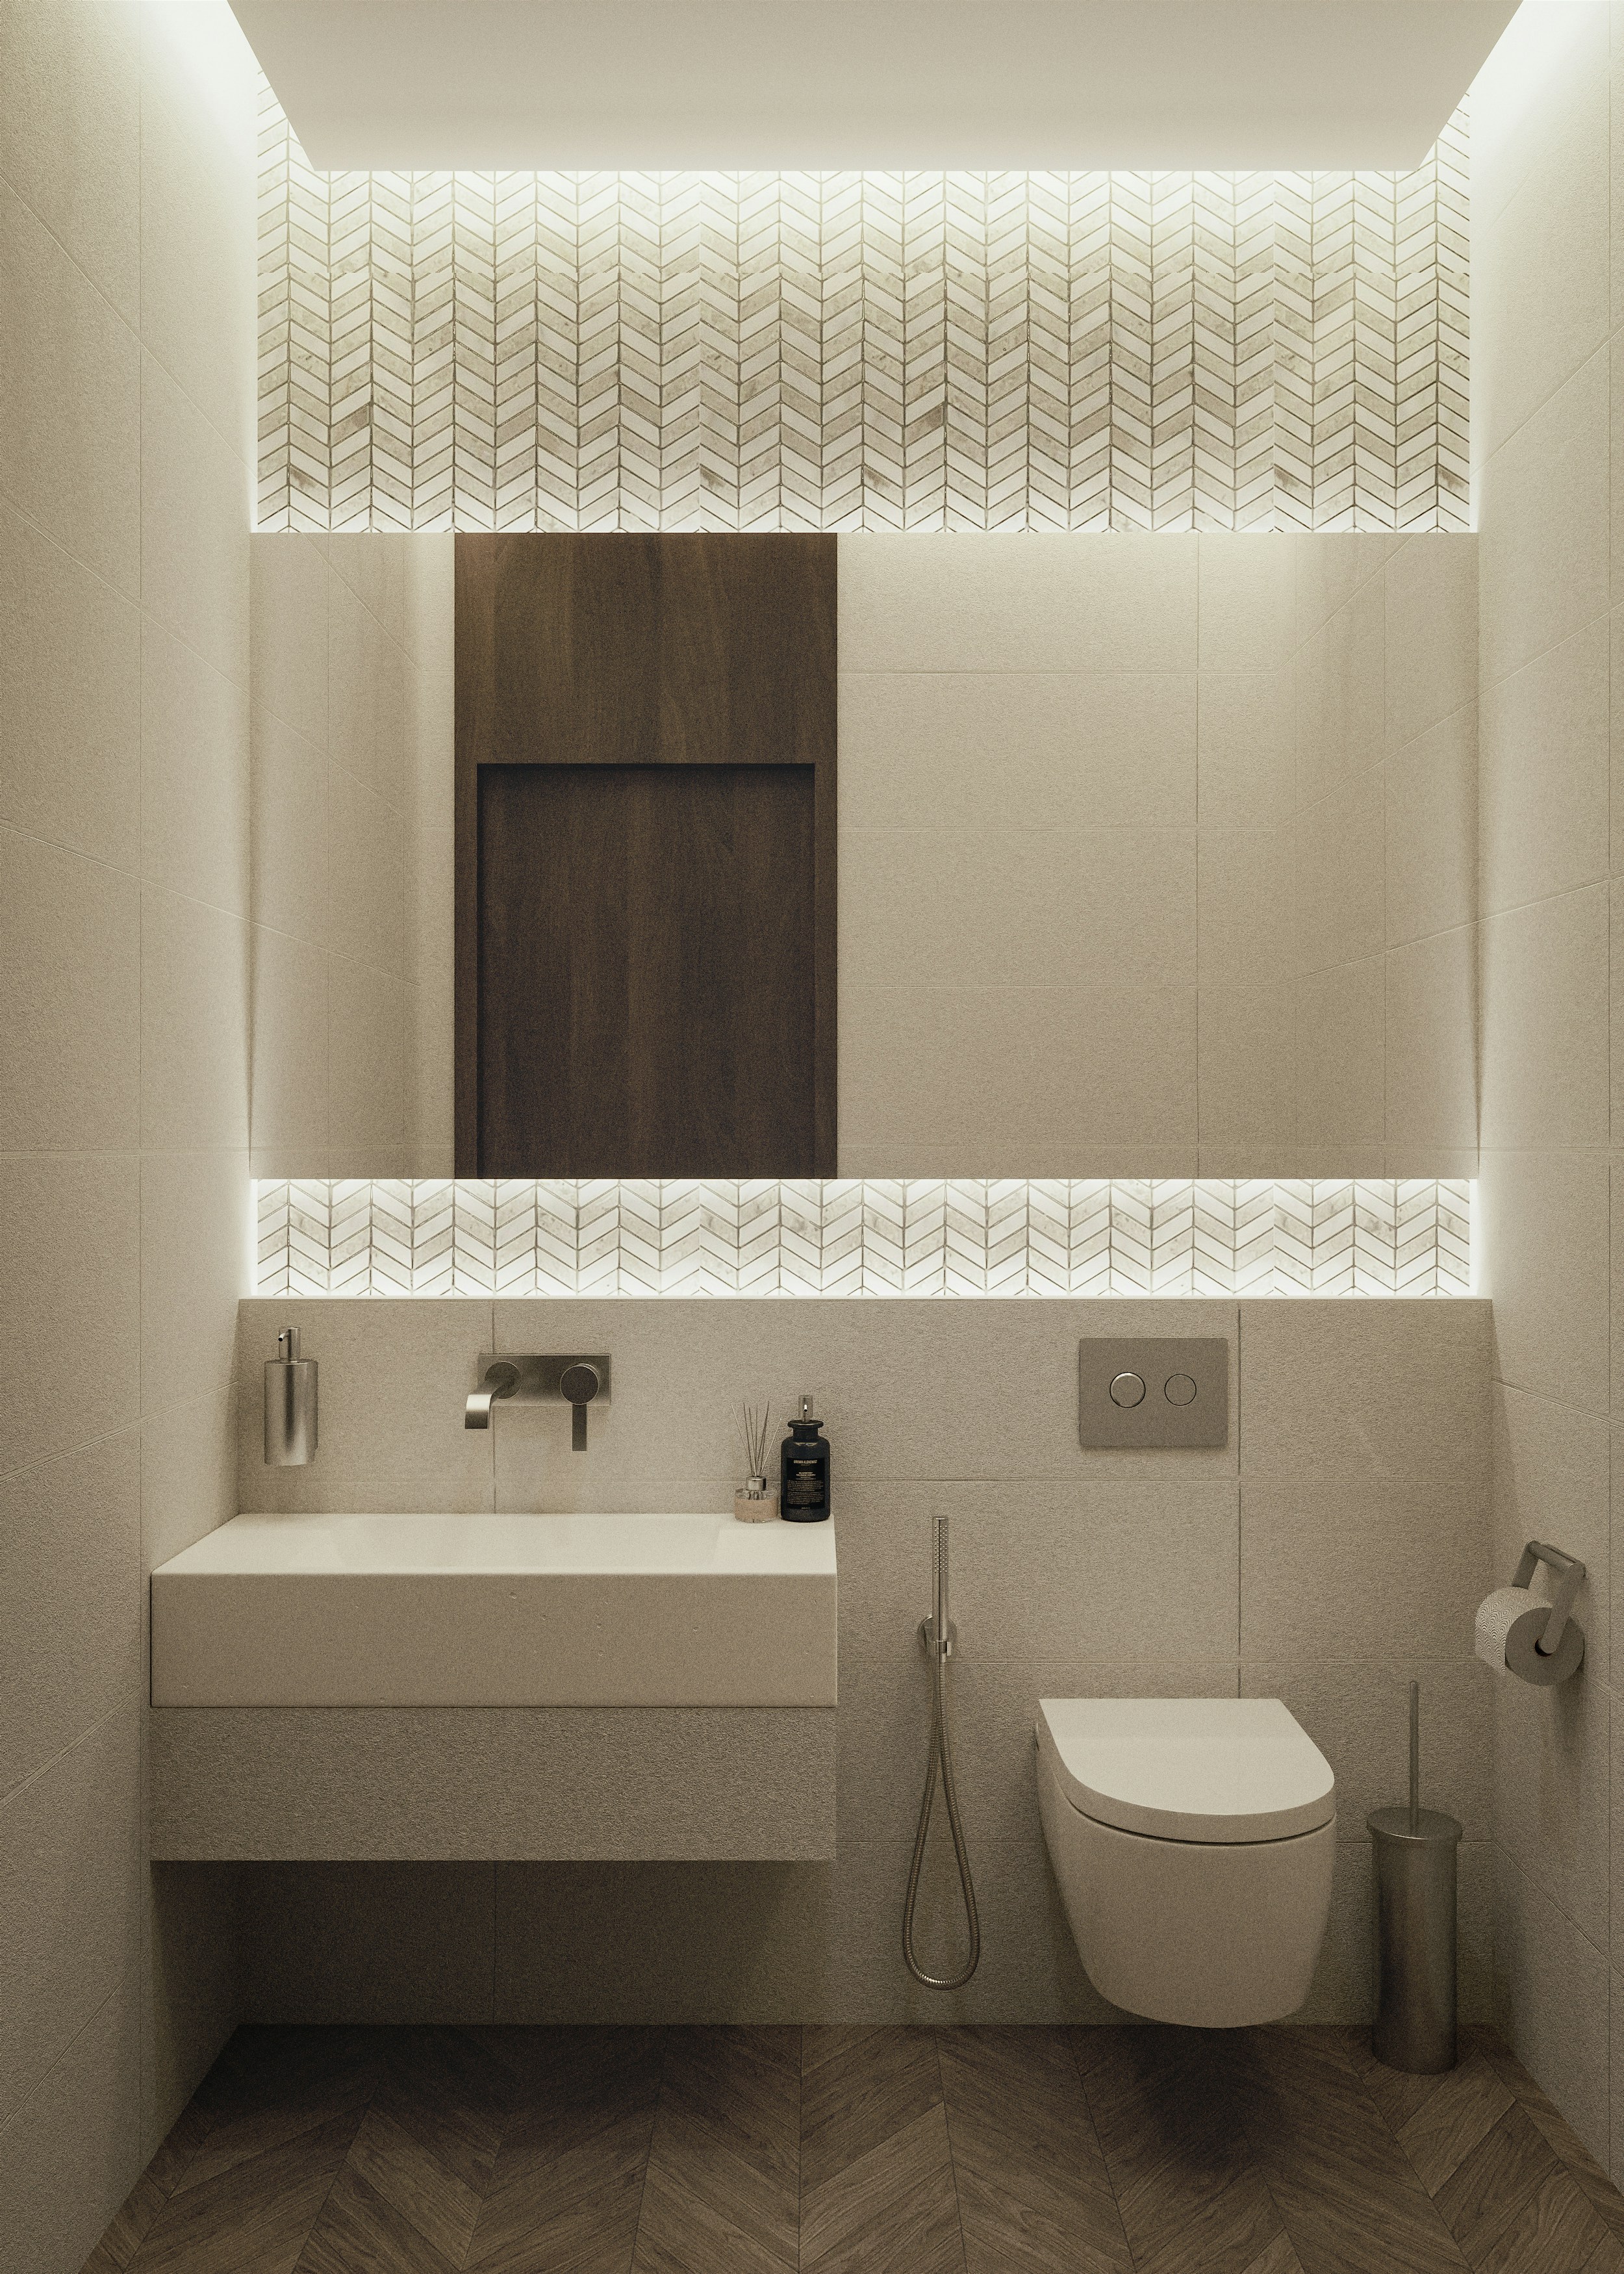 Wall hung toilet in a stylish and eco-friendly bathroom